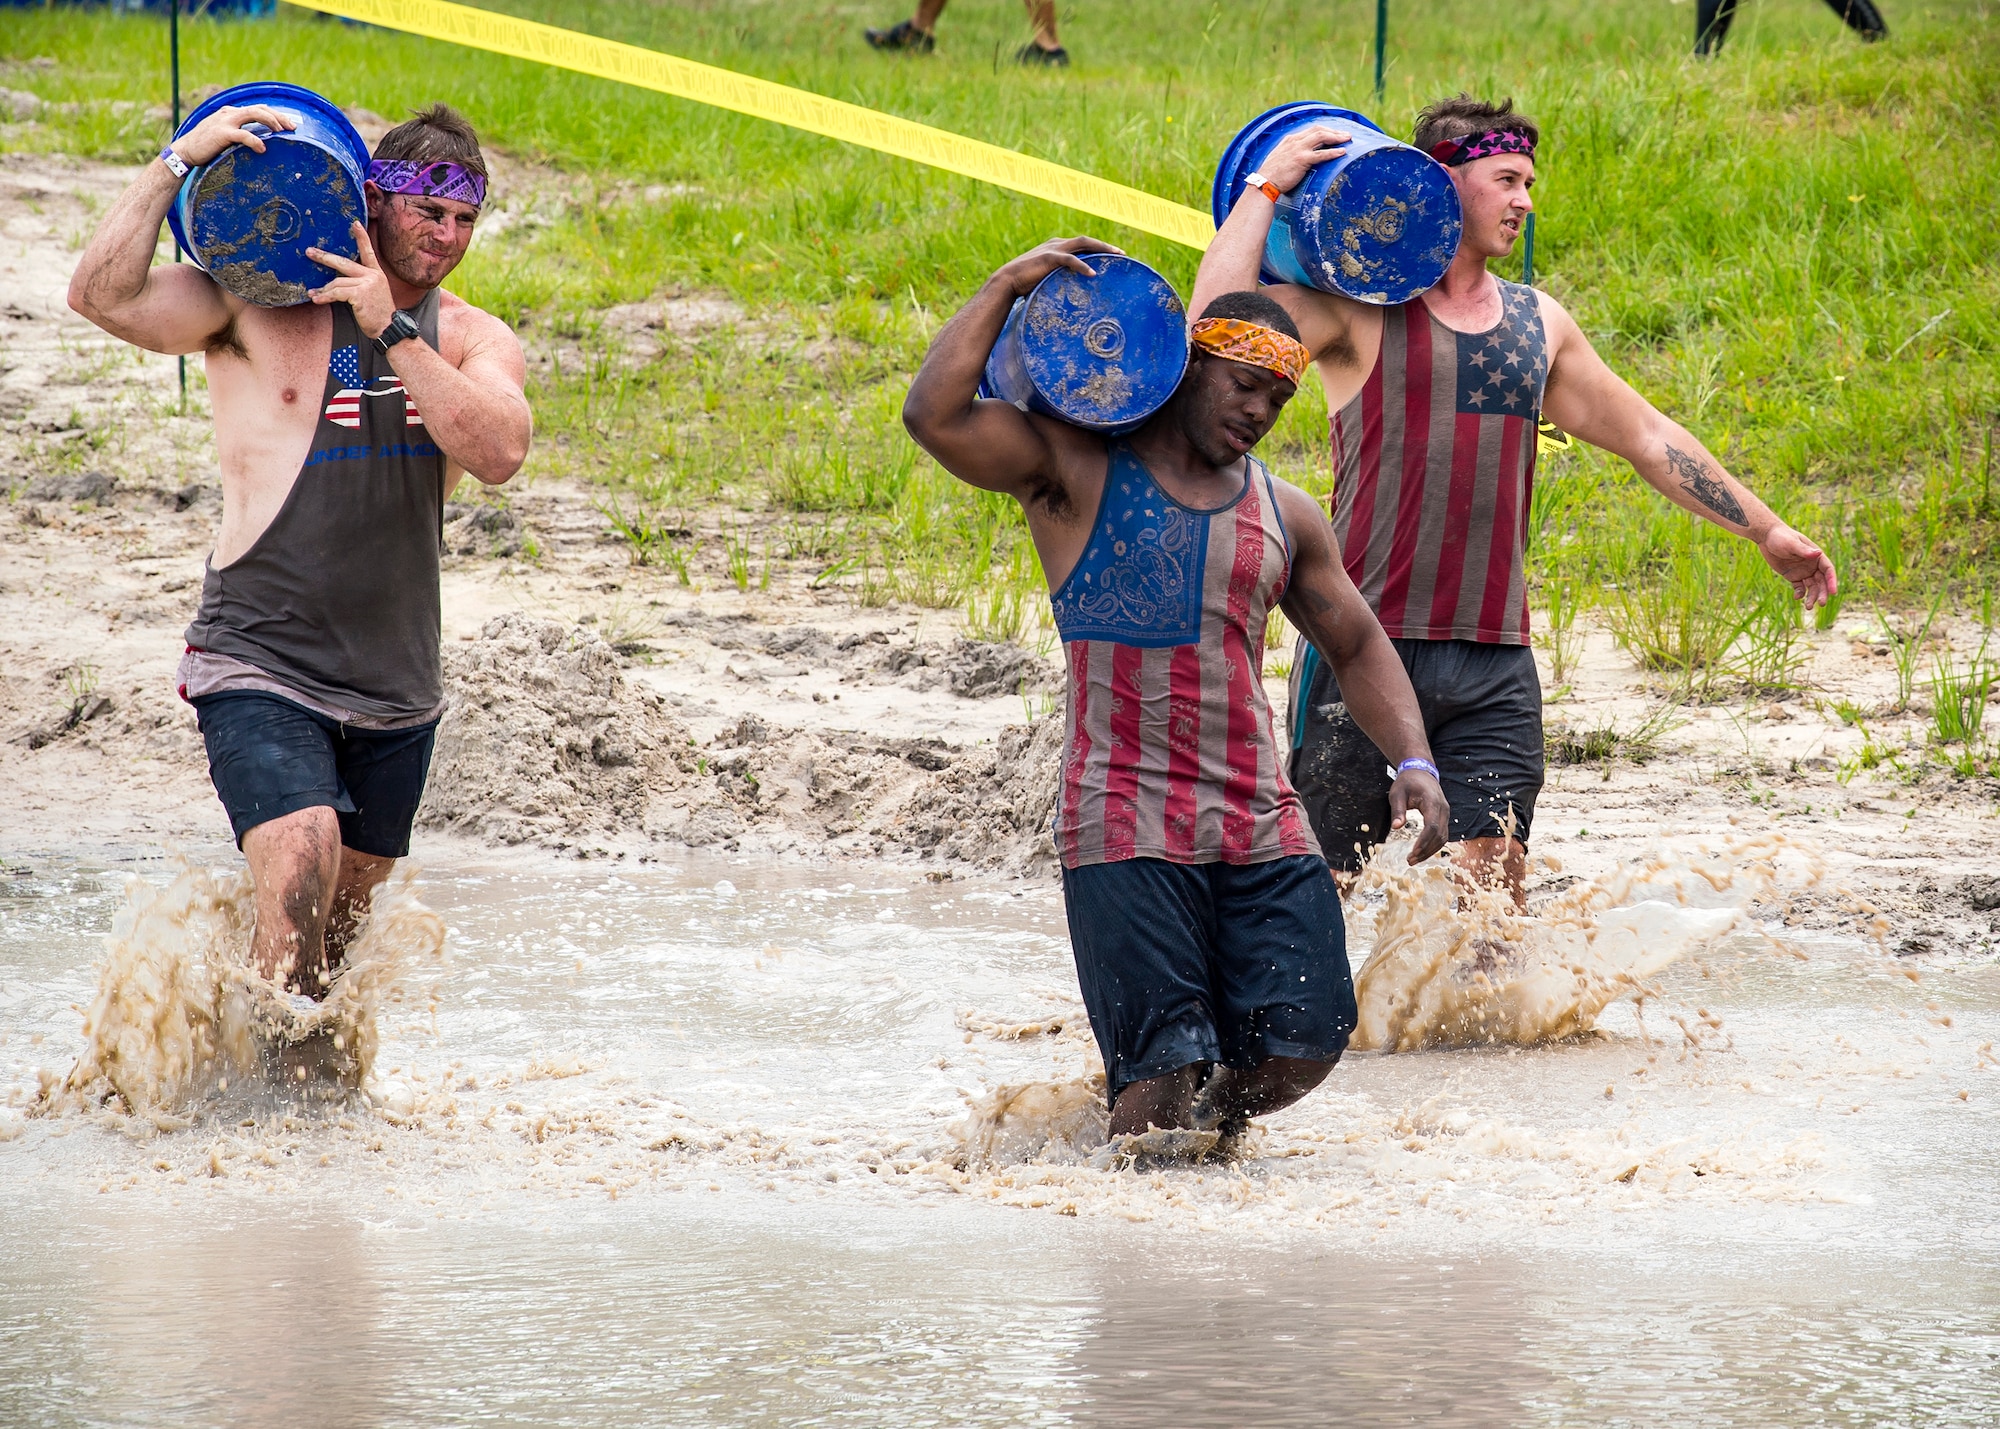 Moody Mud Run participants carry jugs, May 4, 2019, in Ray Ciy, Ga. The sixth annual mud run had approxamately 850 particpants who had to overcome a series of obstacles on the 4 and 5-mile courses. The 32-obstacle course gave Airmen, families and the local community an opportunity to build camaraderie and teamwork skills. (U.S. Air Force photo by Airman 1st Class Eugene Oliver)